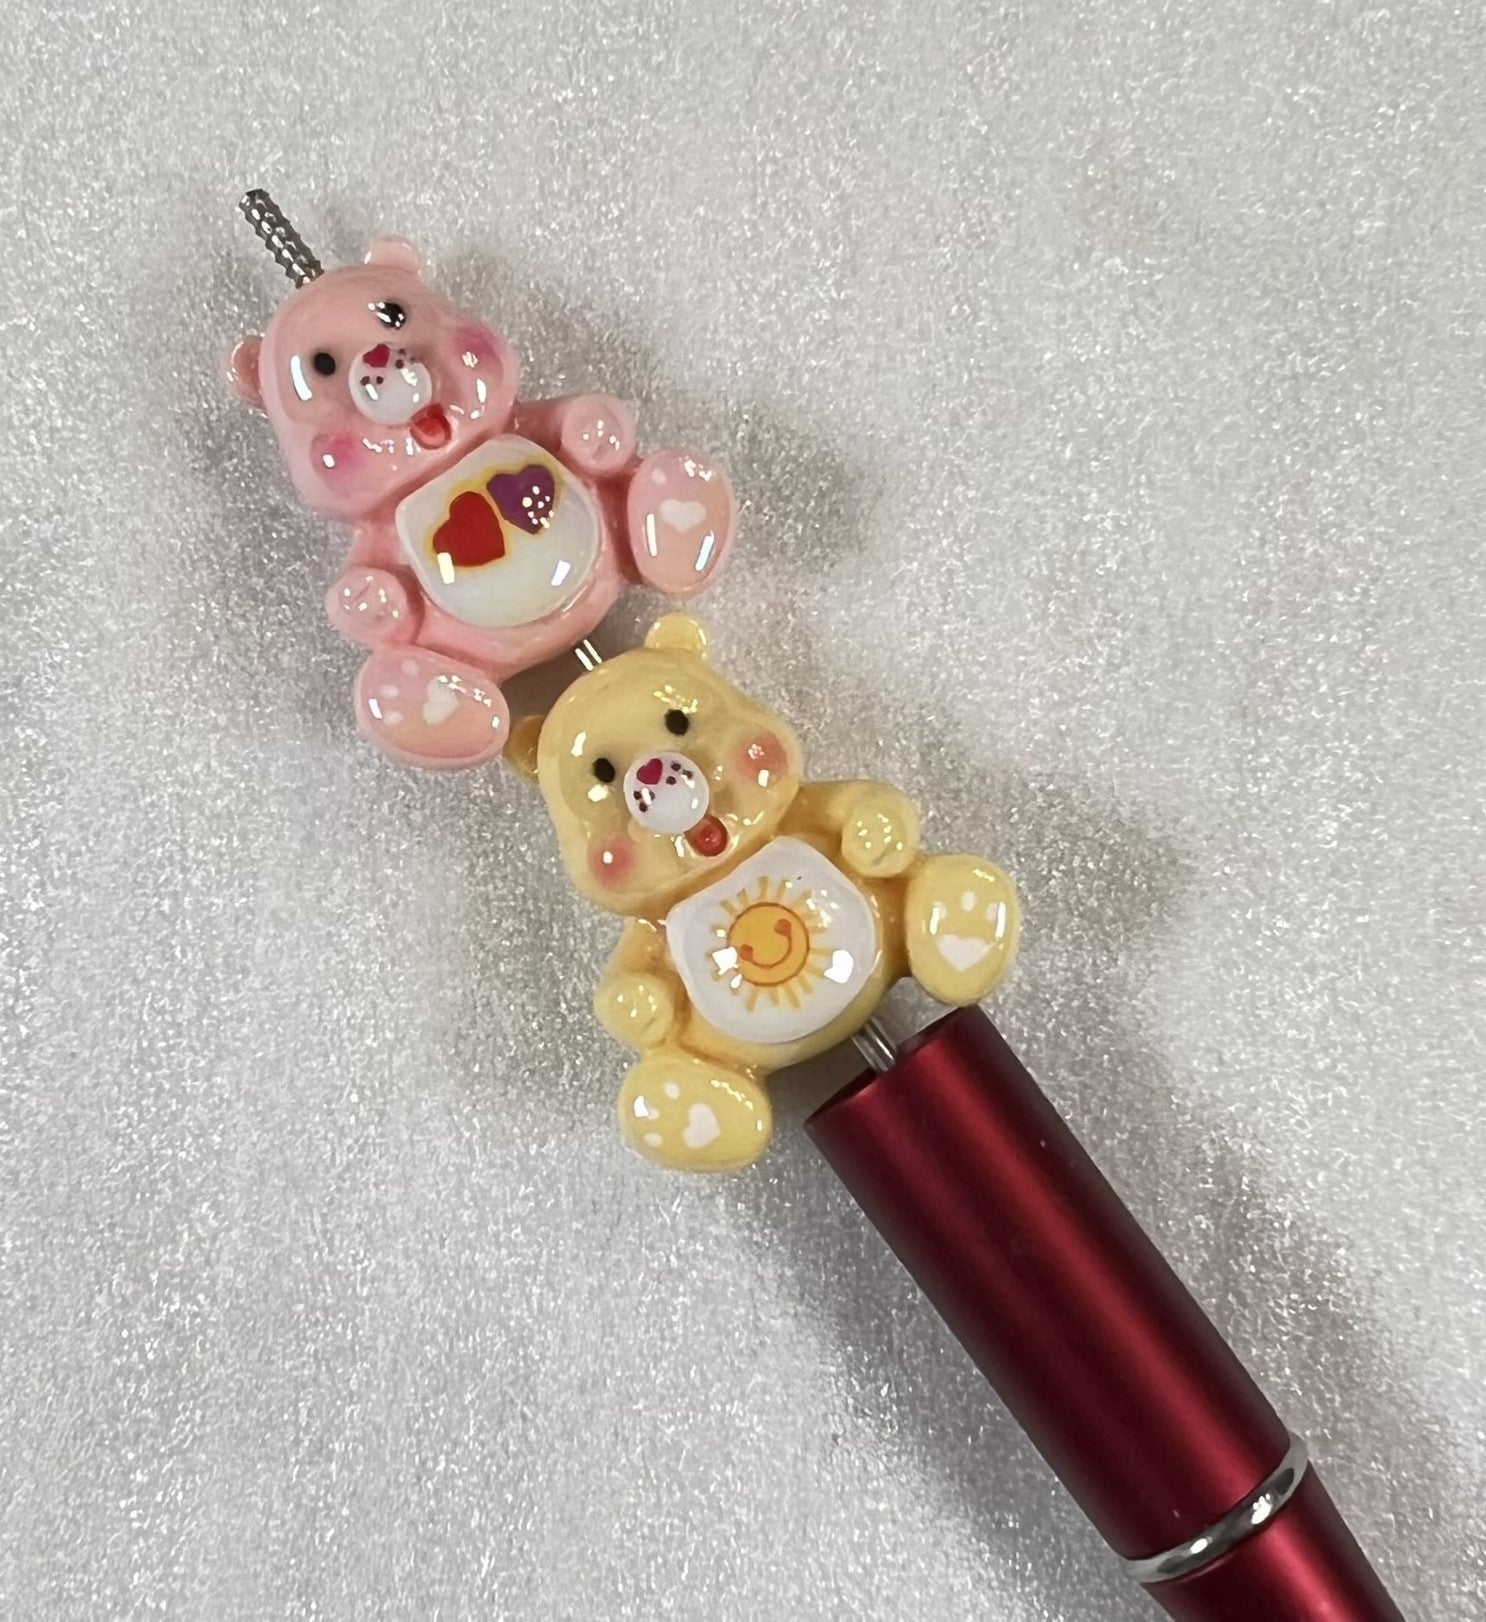 1" Caring Bear Beads for Pens and Jewelry | Flat Back Acrylic | QTY: 1 bead - The Dazzle Depot